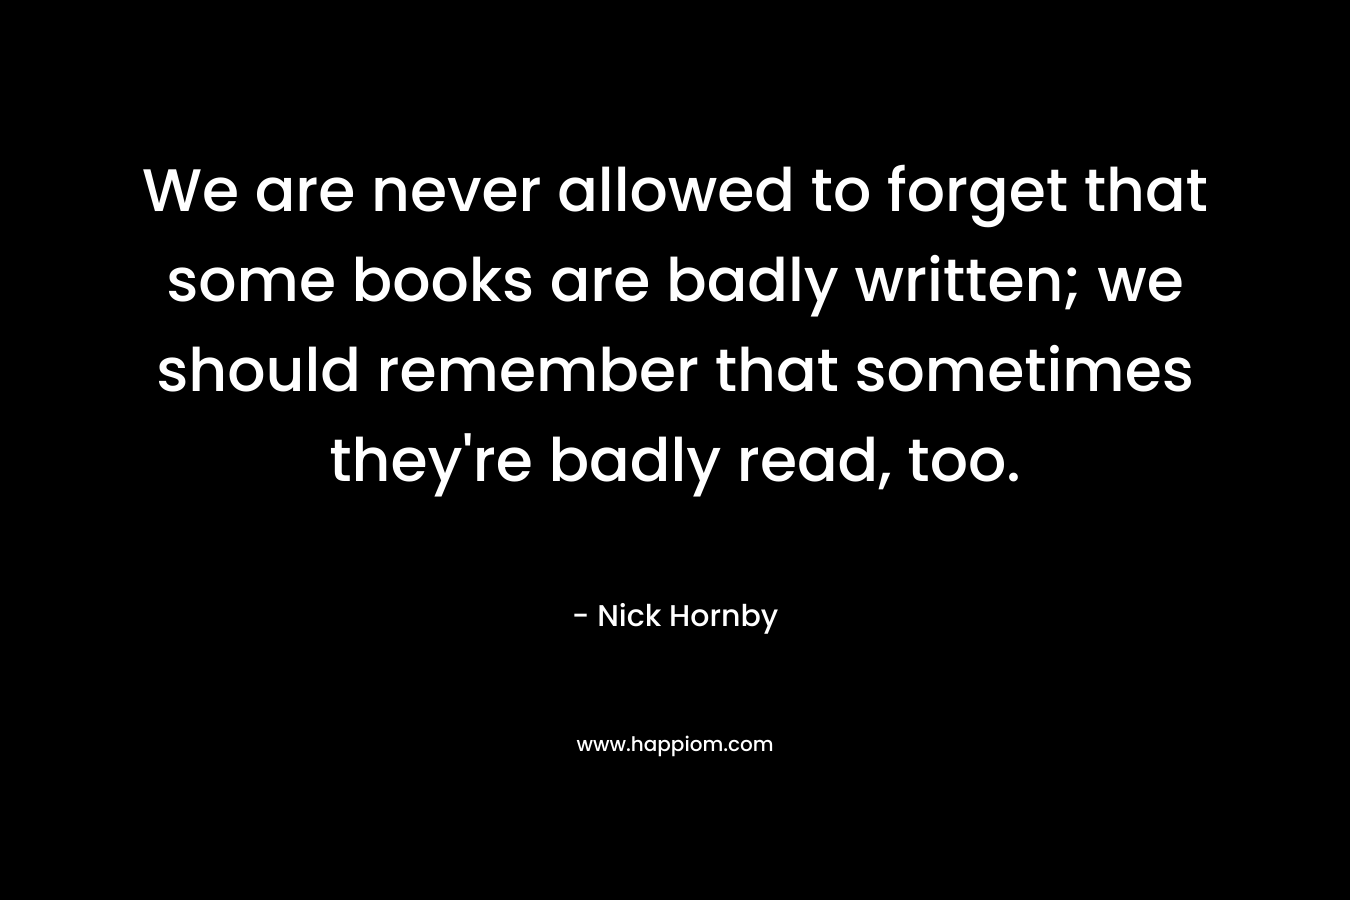 We are never allowed to forget that some books are badly written; we should remember that sometimes they're badly read, too.